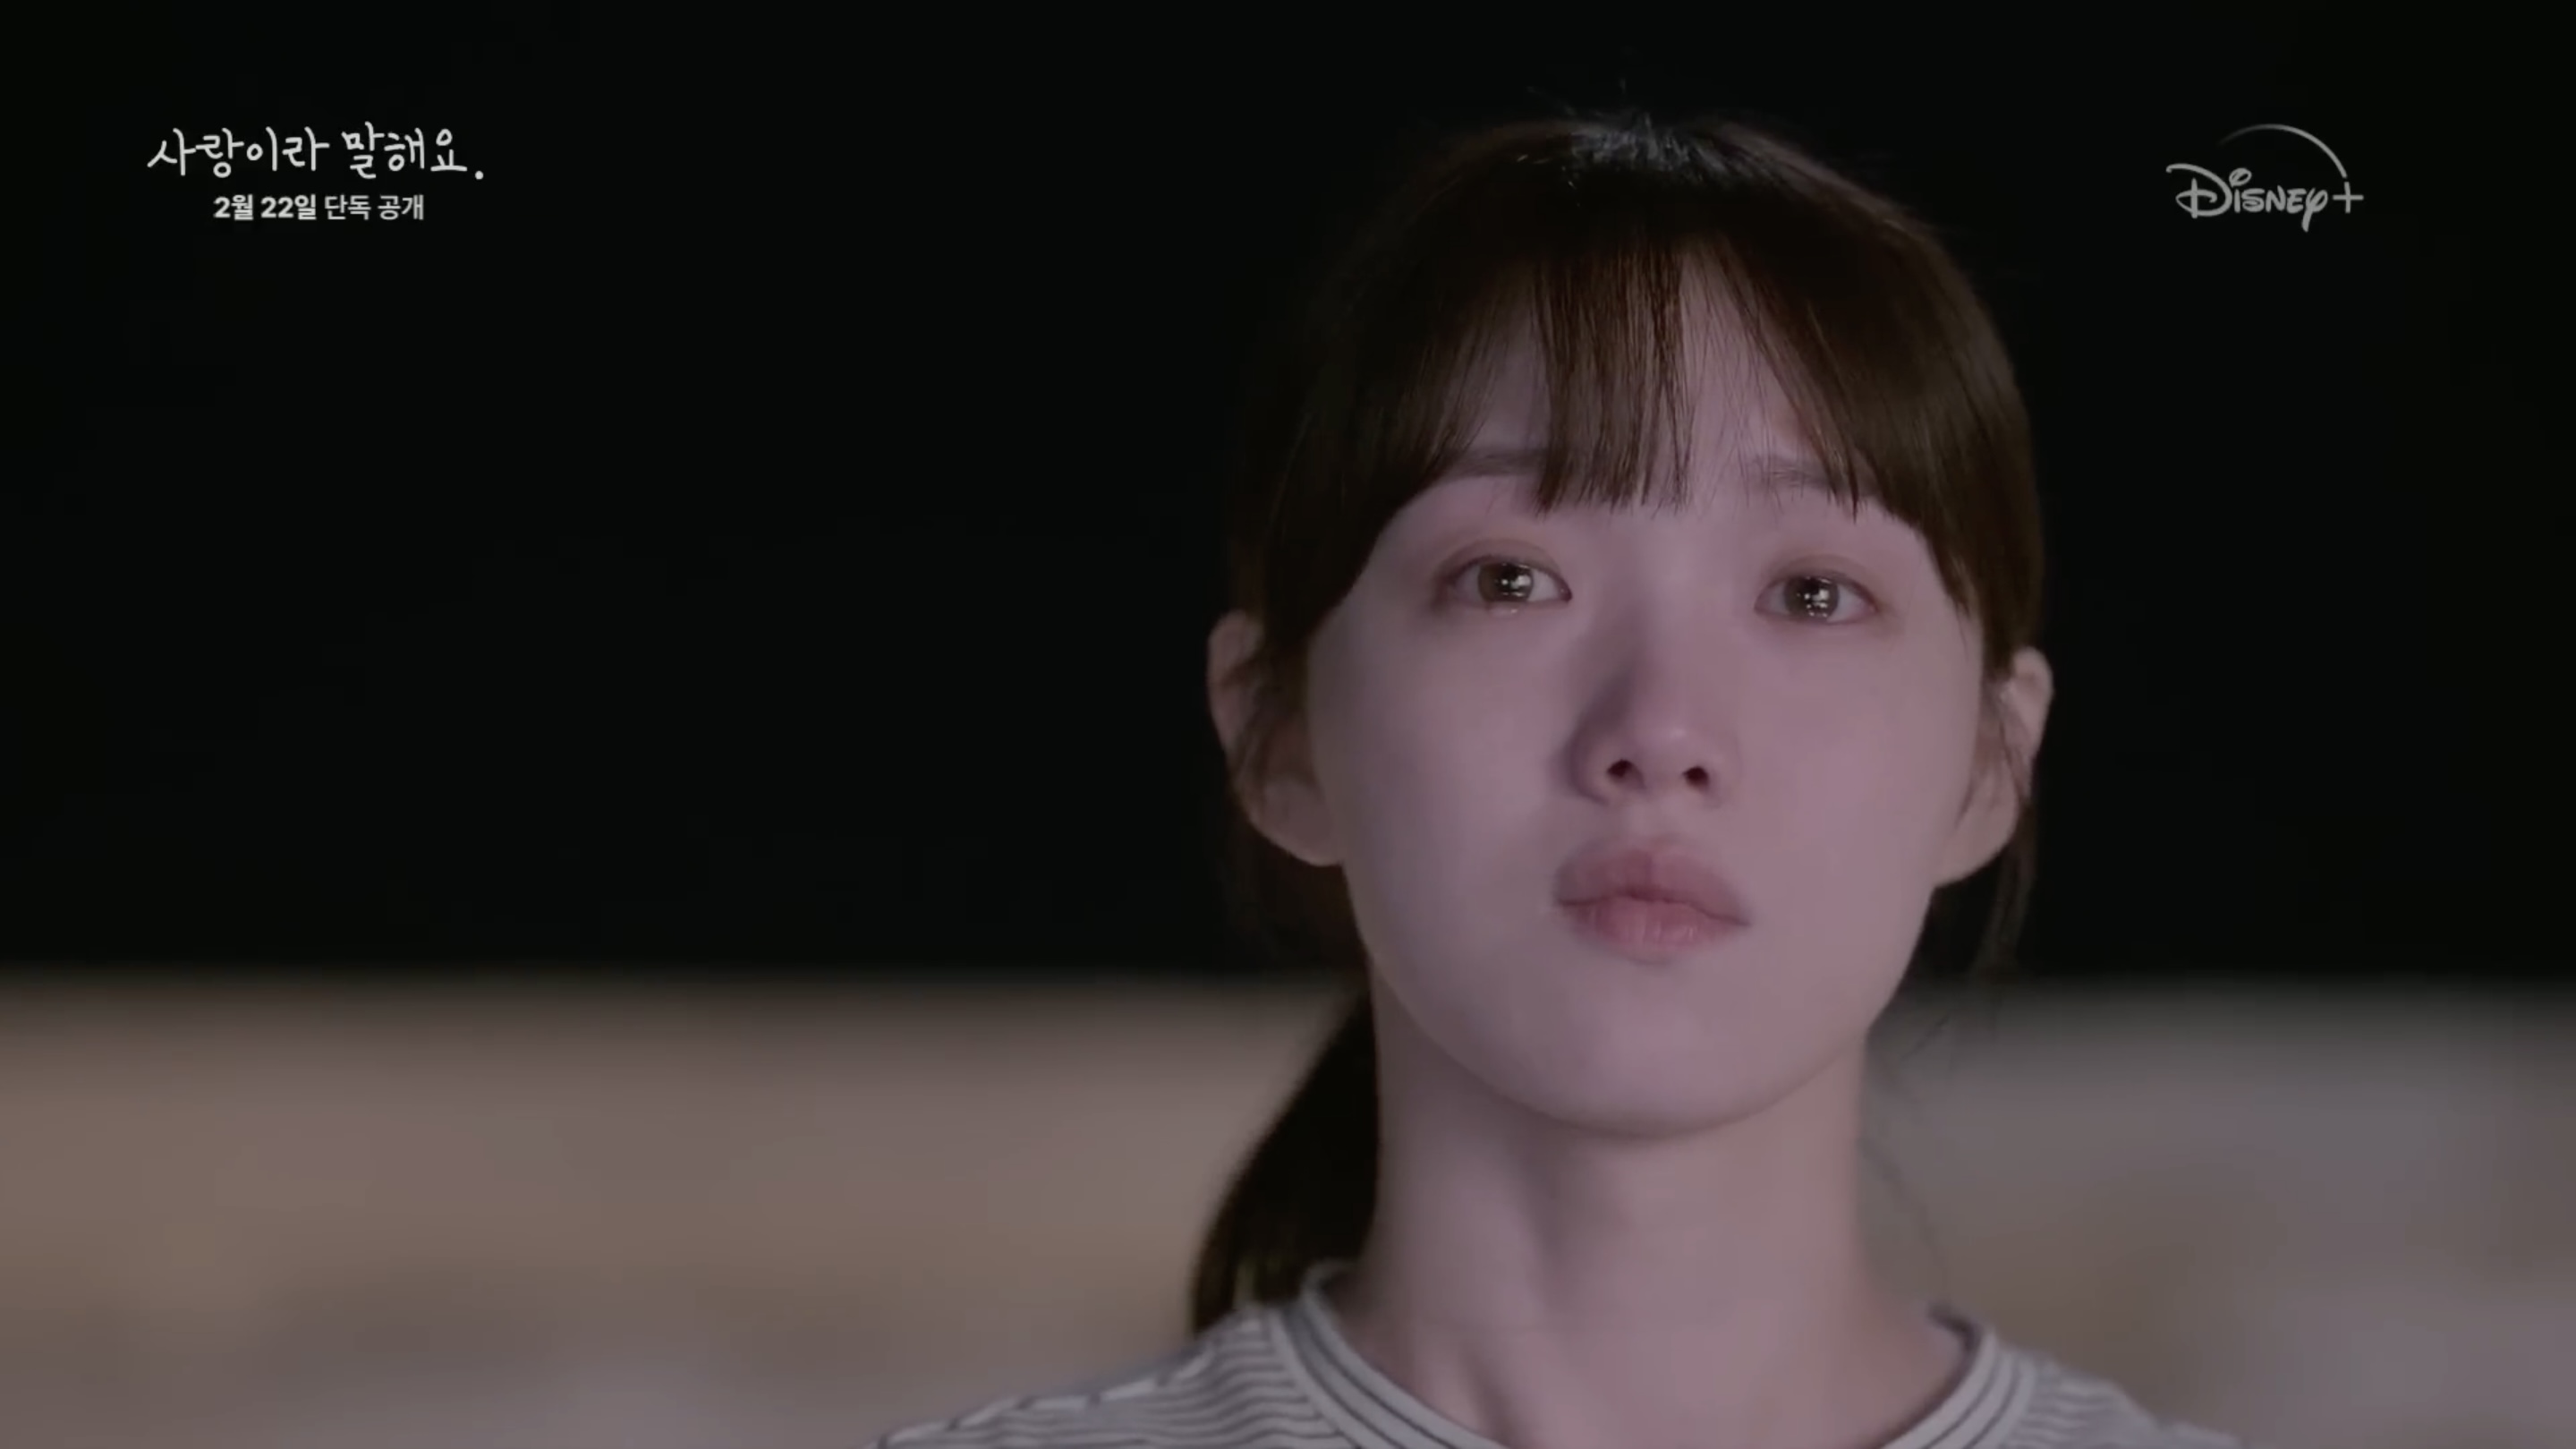 Amidst betrayal, can Lee Sung-kyung Call it Love?